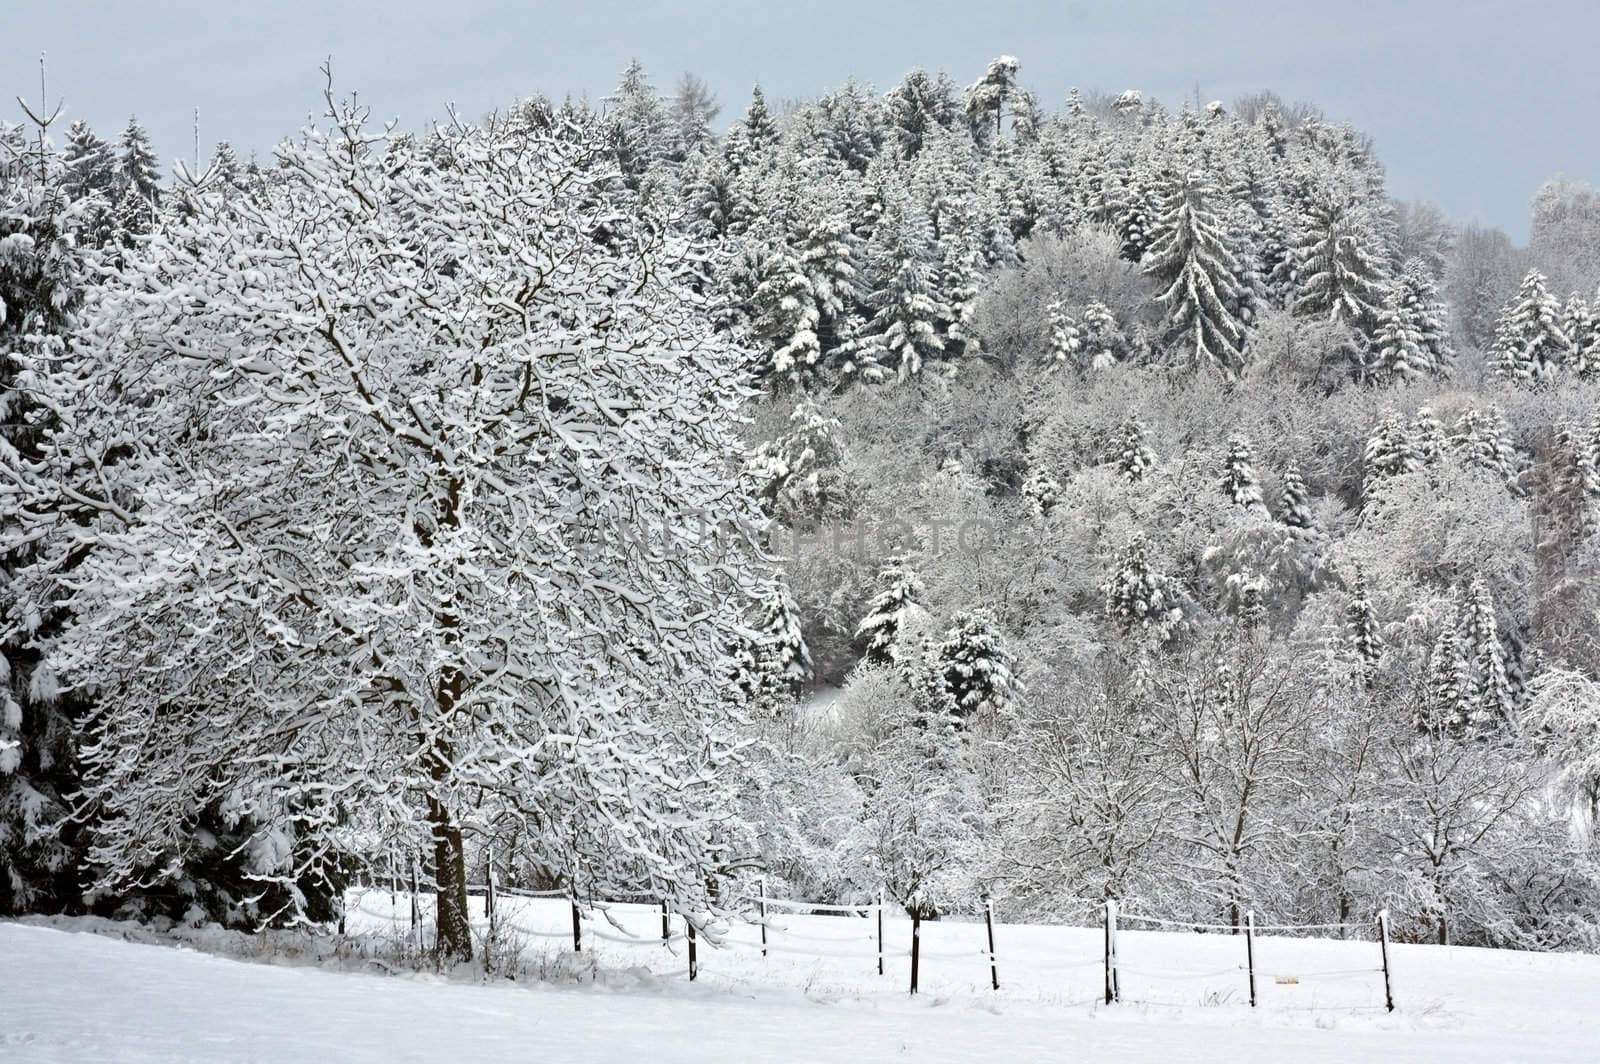 This image shows snocapped trees with fence